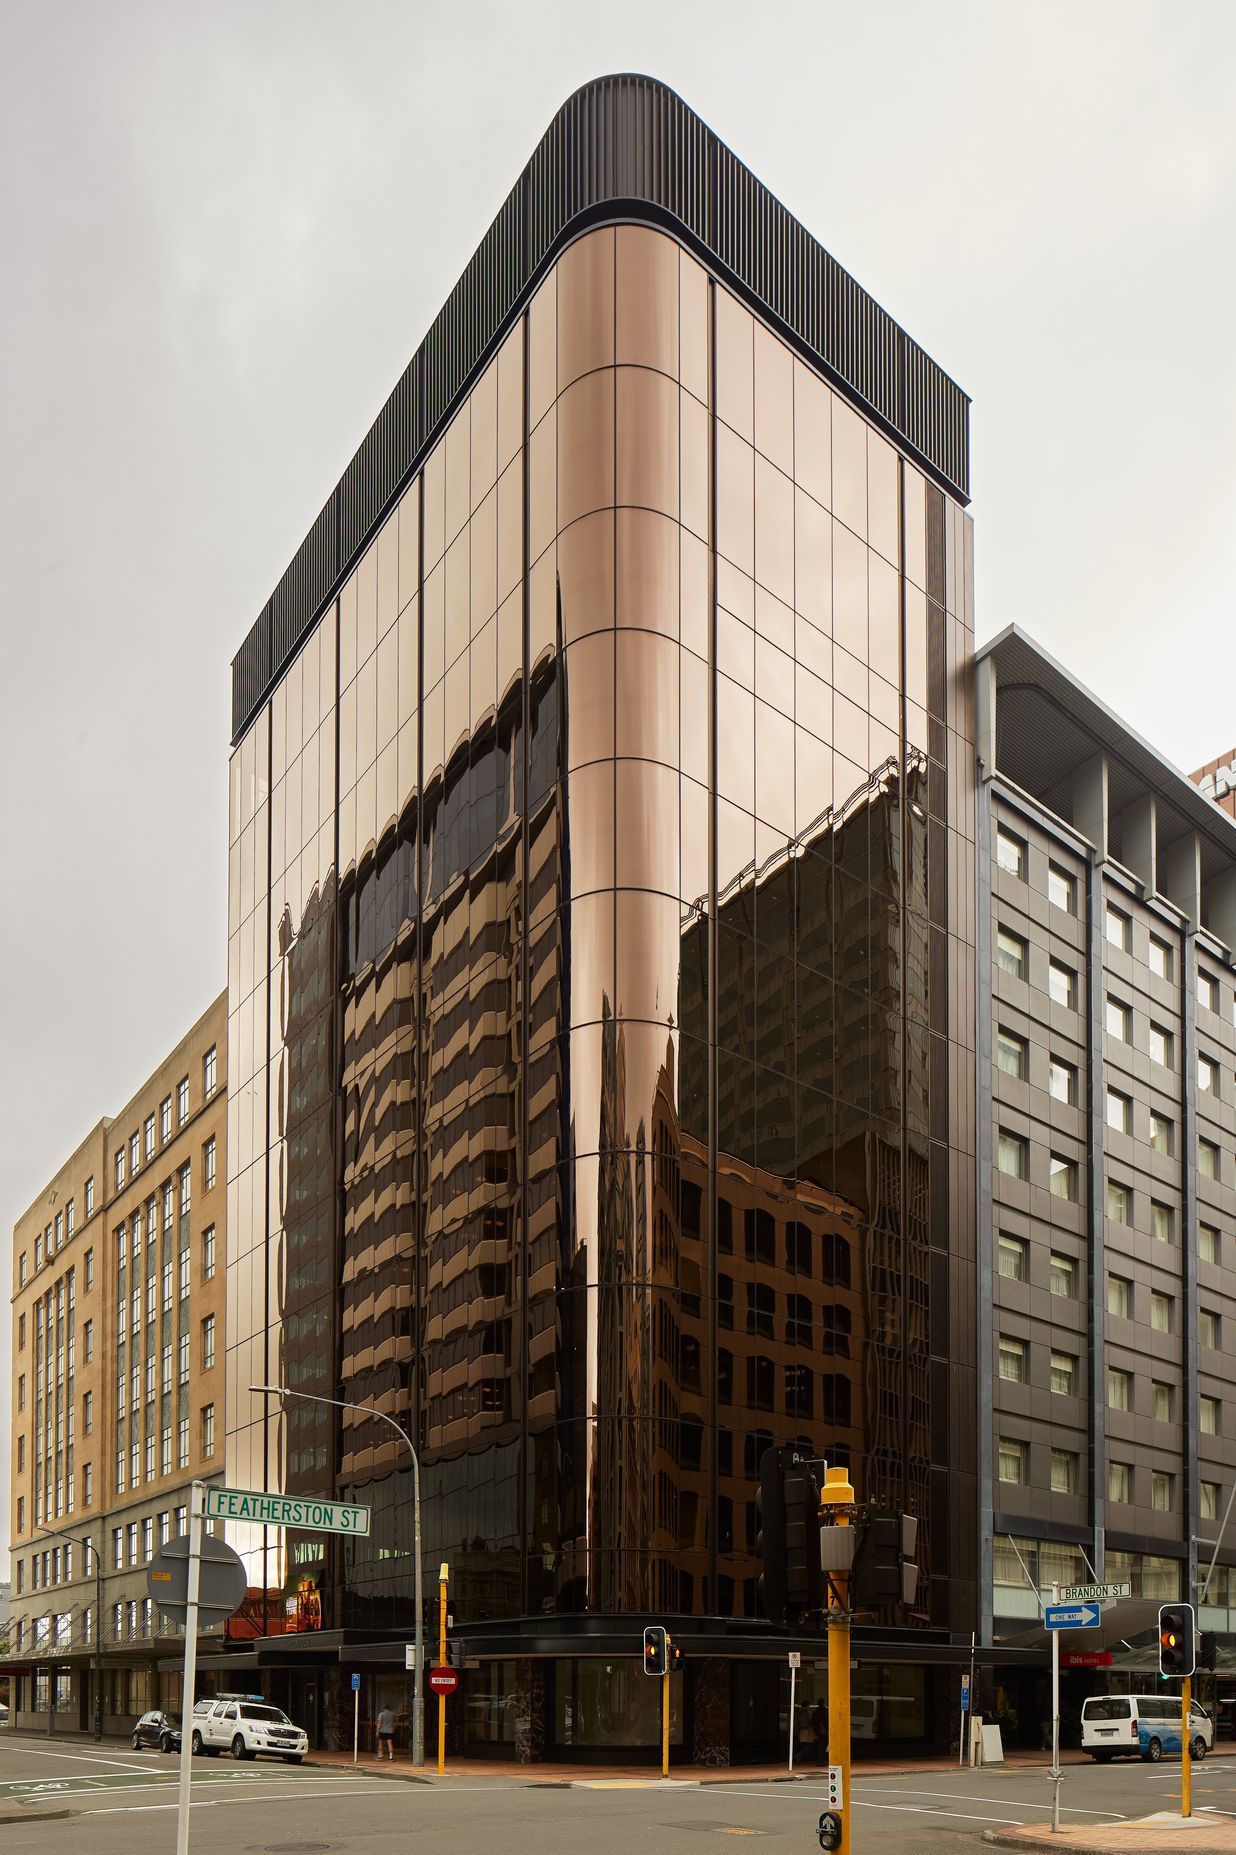 The 1960s building in Wellington has been extensively refurbished. “It was called The Leaders Building,” says Marc Woodbury of Studio Pacific Architecture. “I think it was originally built for an insurance company.” Now owned by RJH, its new name, Brandon House, refers to its location on the corner of Featherston and Brandon Streets.